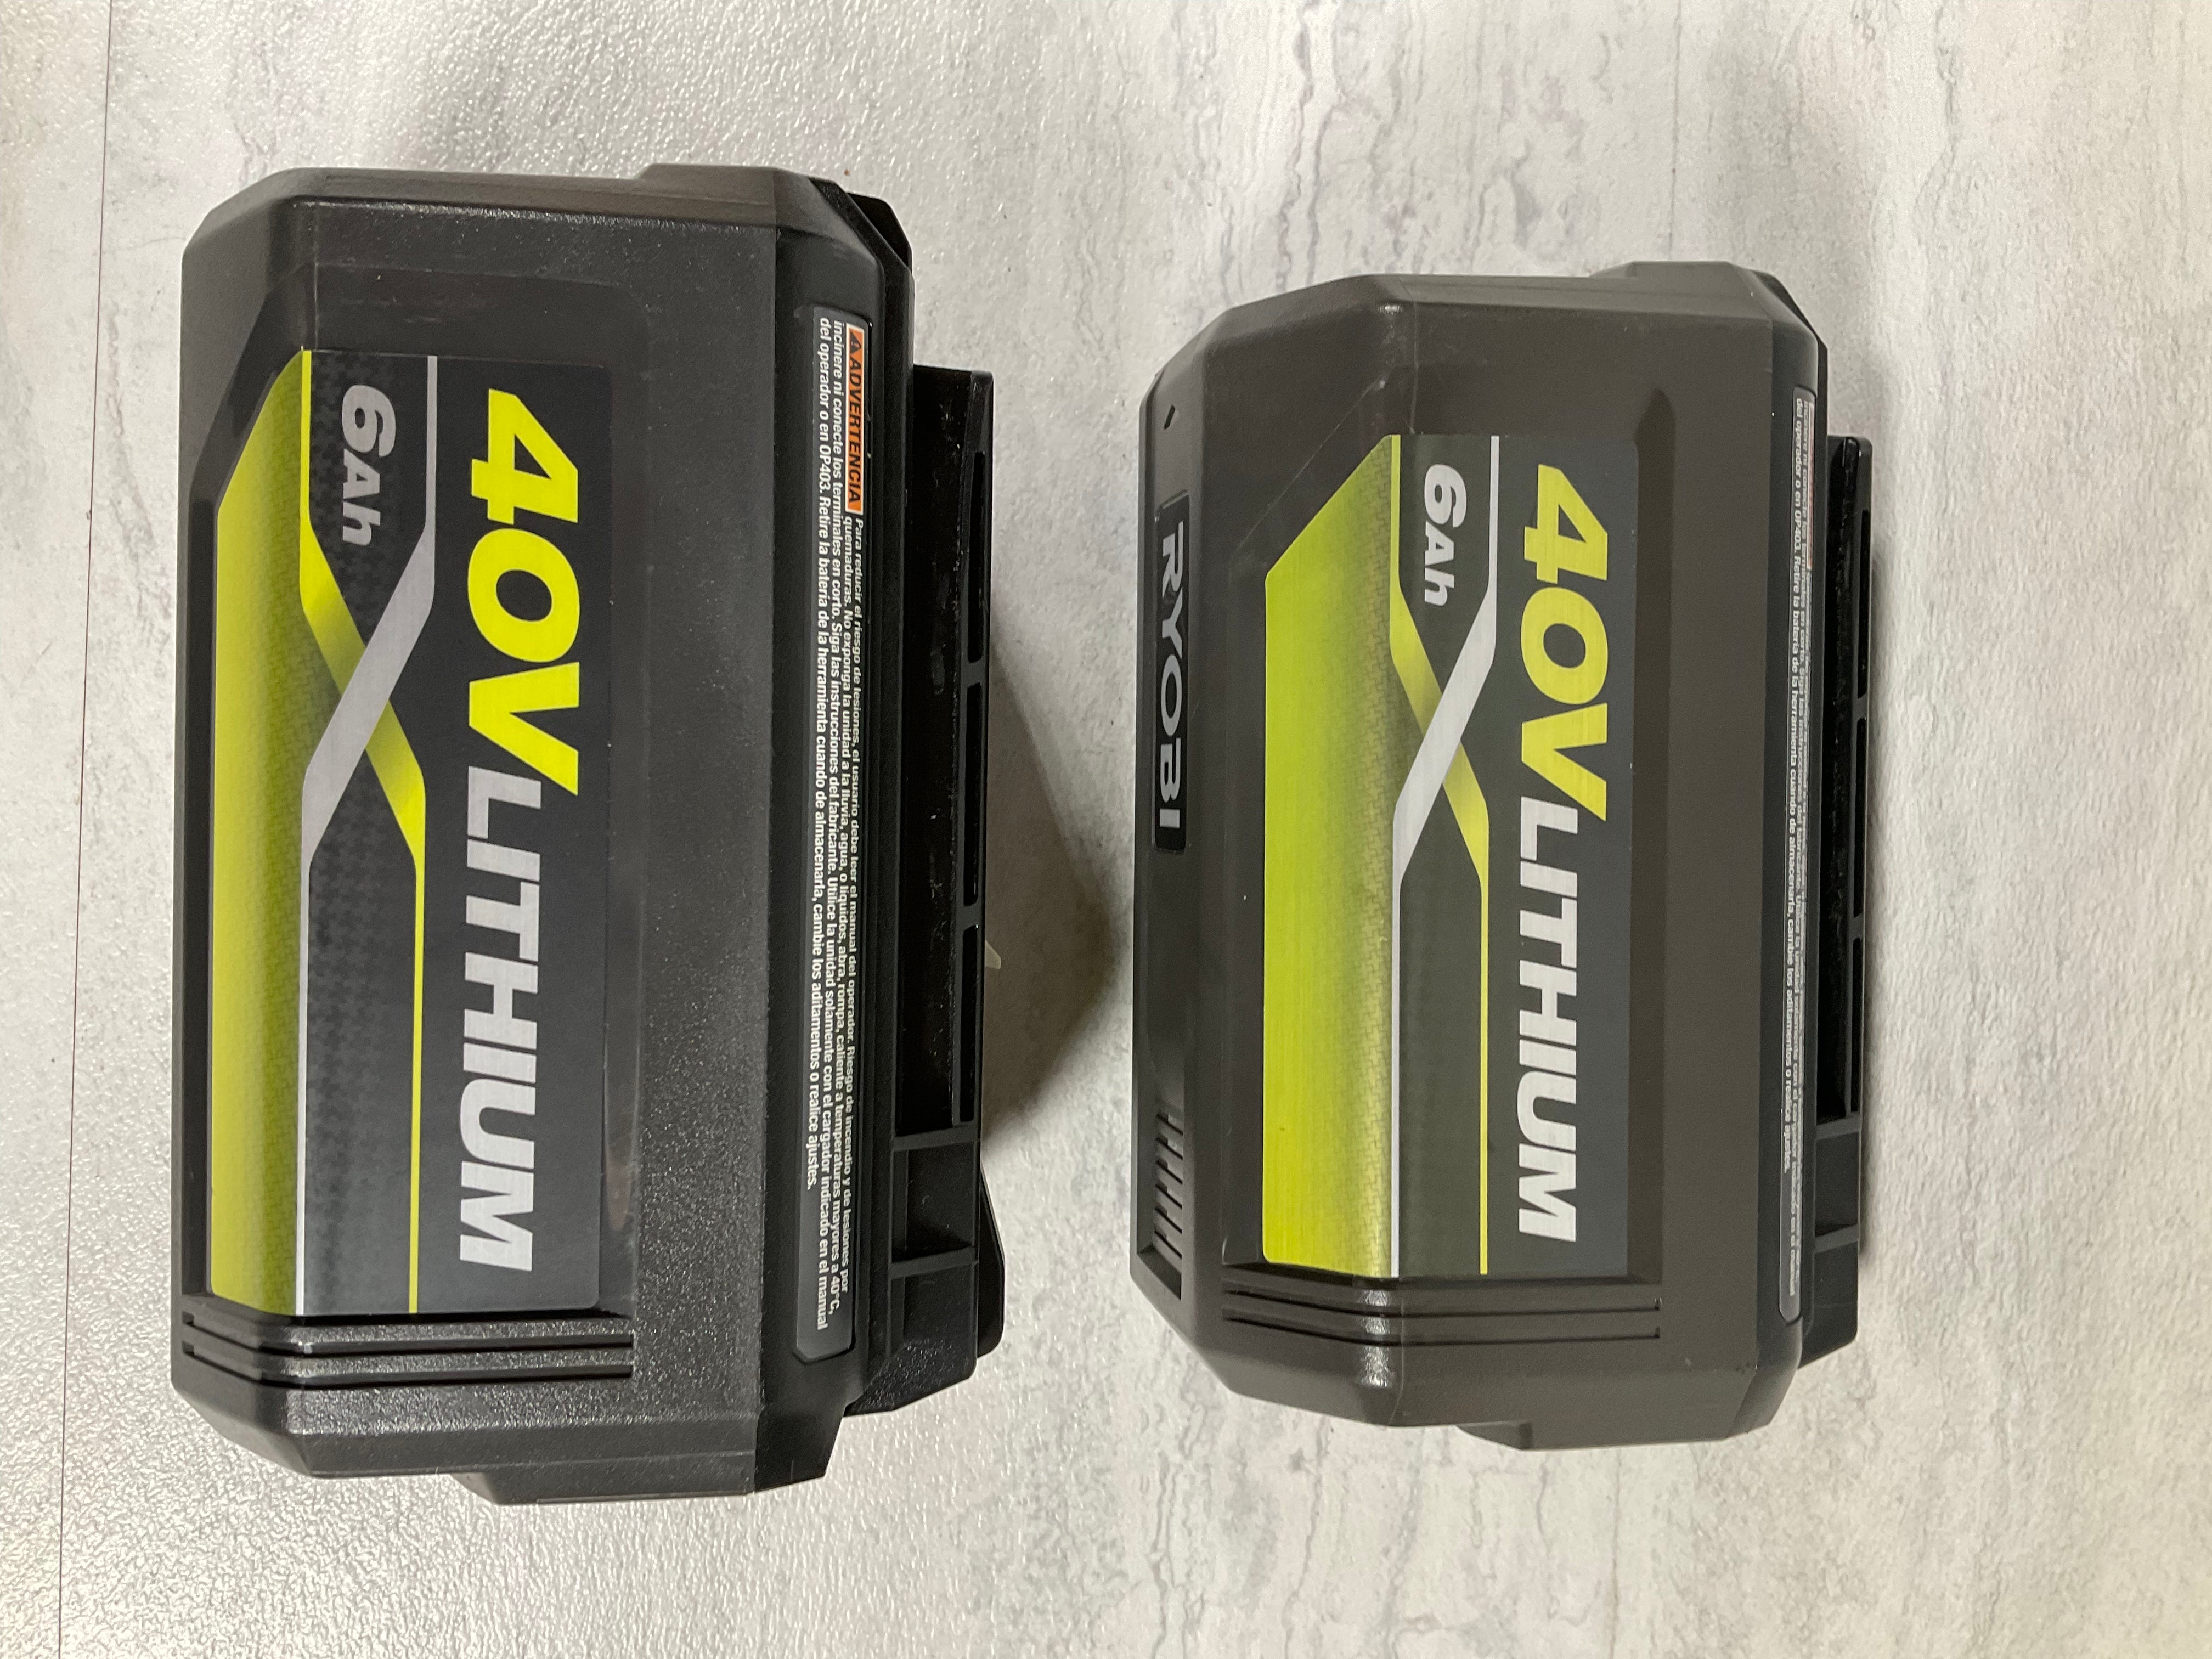 (2) Not Working Ryobi 0P40602 40v 6Ah Lithium Batteries, FOR PARTS (7197972398318)